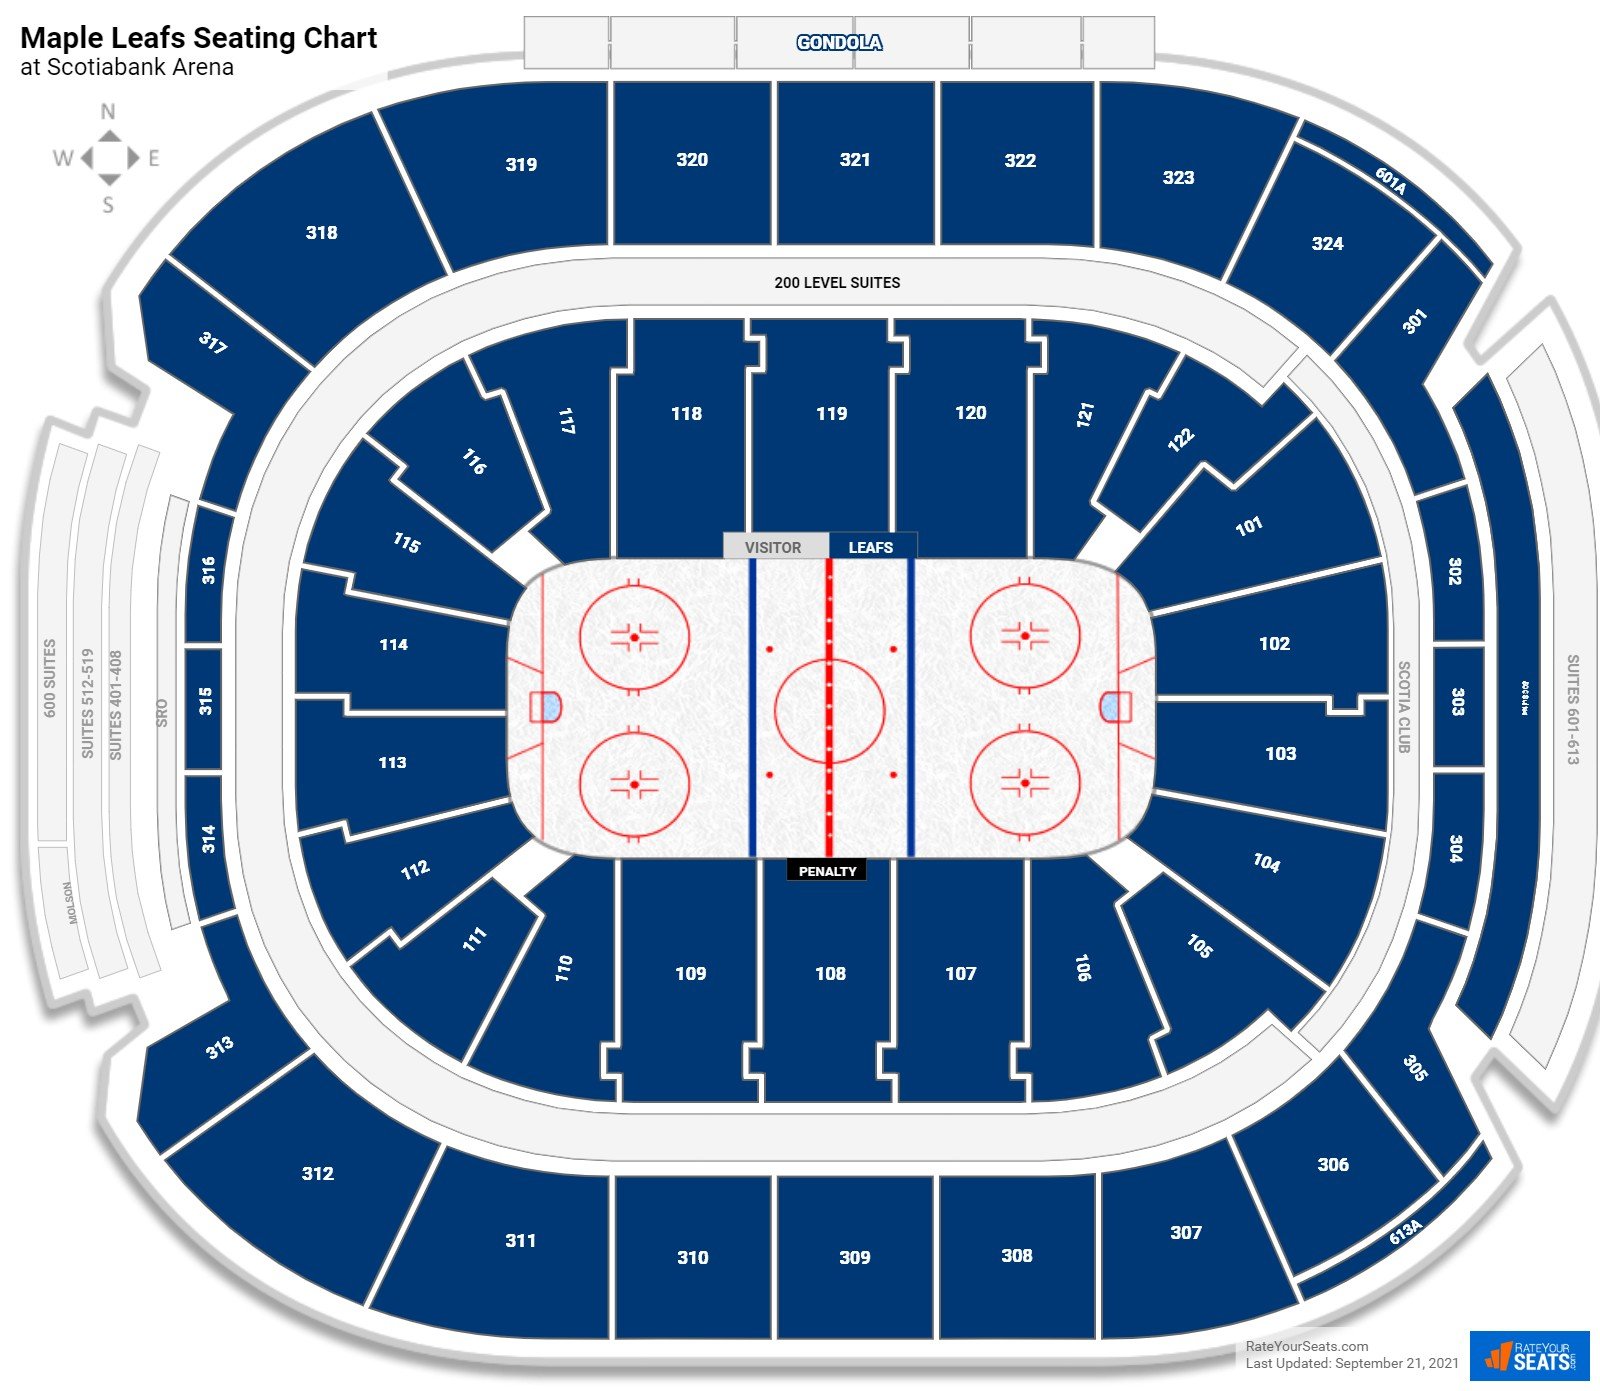 Toronto Maple Leafs Seating Chart at Scotiabank Arena